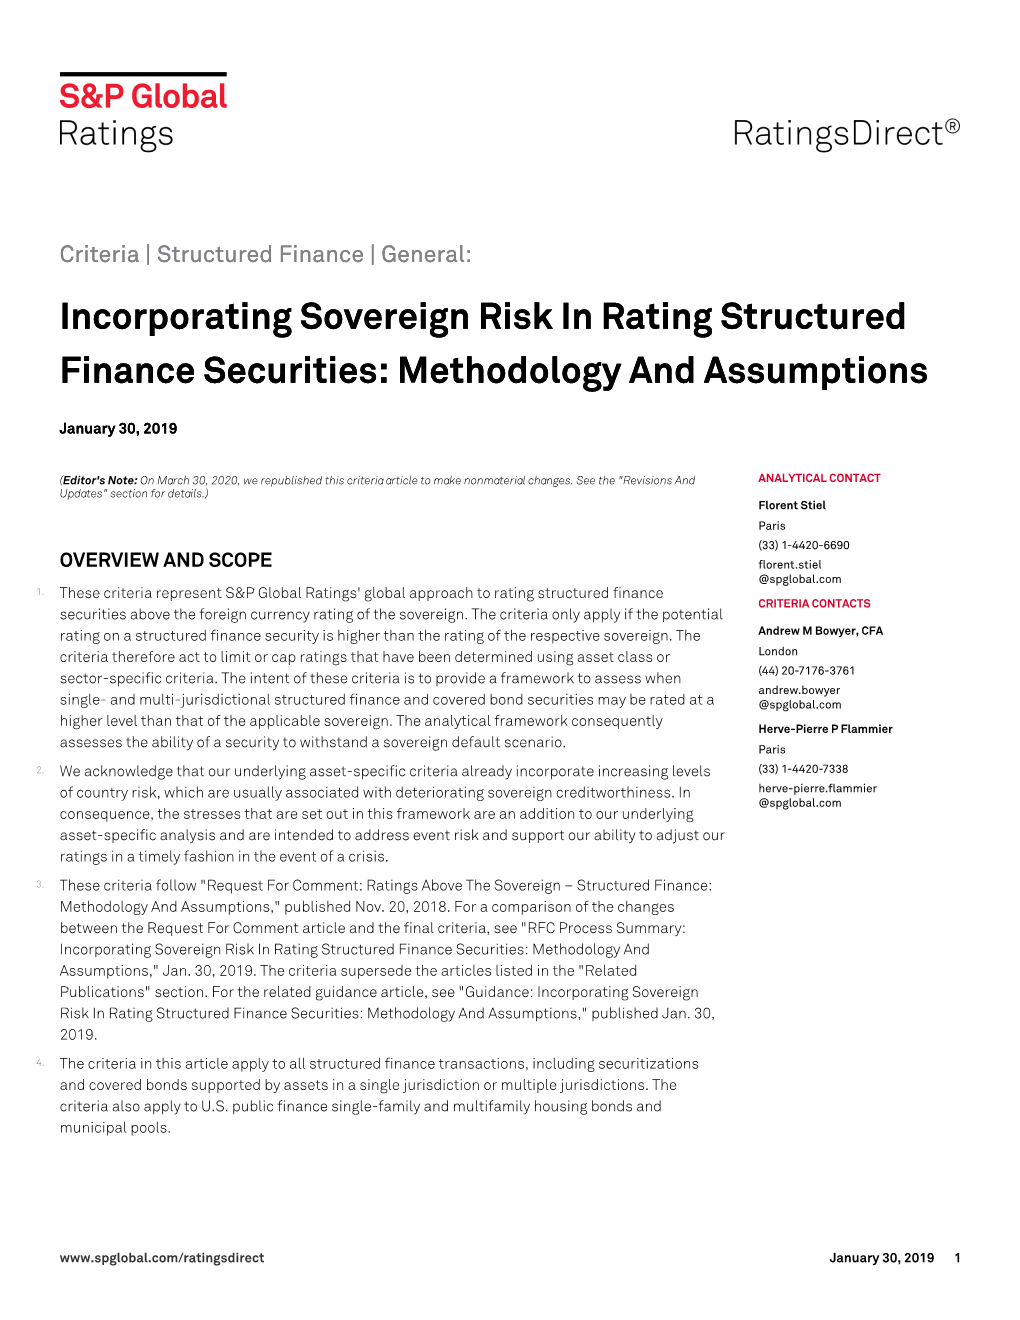 Incorporating Sovereign Risk in Rating Structured Finance Securities: Methodology and Assumptions